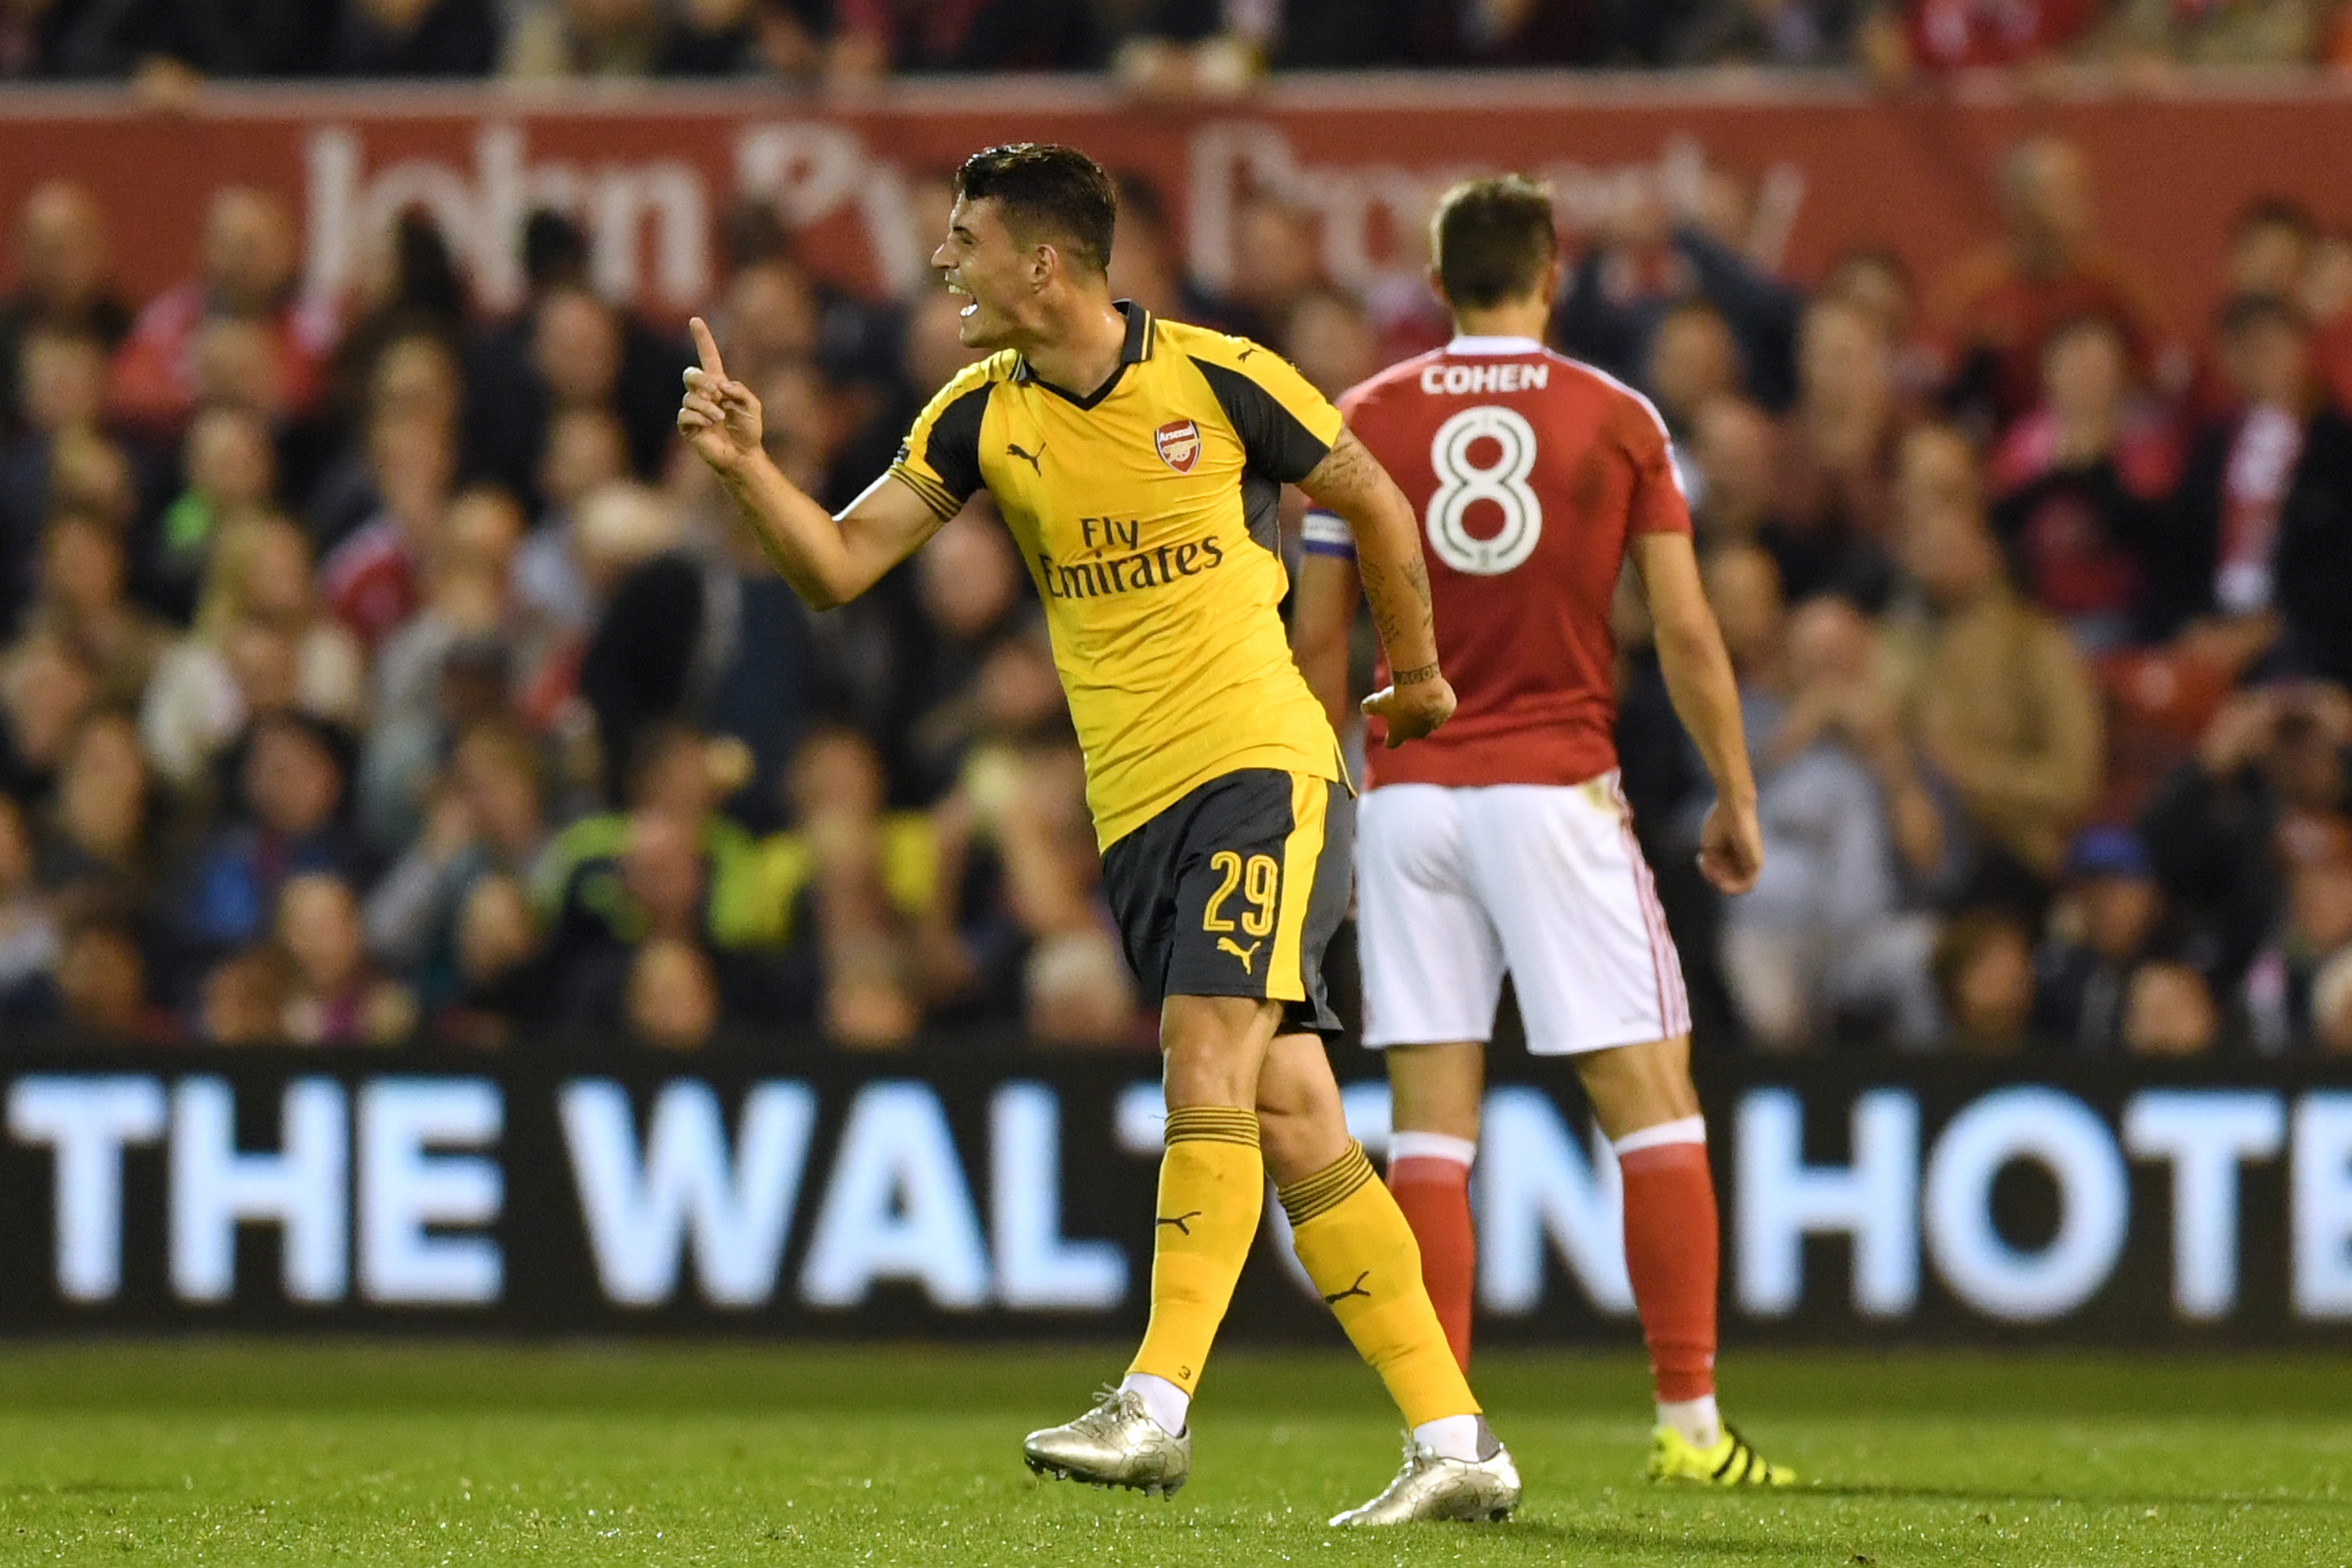 NOTTINGHAM, ENGLAND - SEPTEMBER 20:  Granit Xhaka of Arsenal celebrates scoring the opening goal during the EFL Cup Third Round match between Nottingham Forest and Arsenal at City Ground on September 20, 2016 in Nottingham, England.  (Photo by Shaun Botterill/Getty Images)